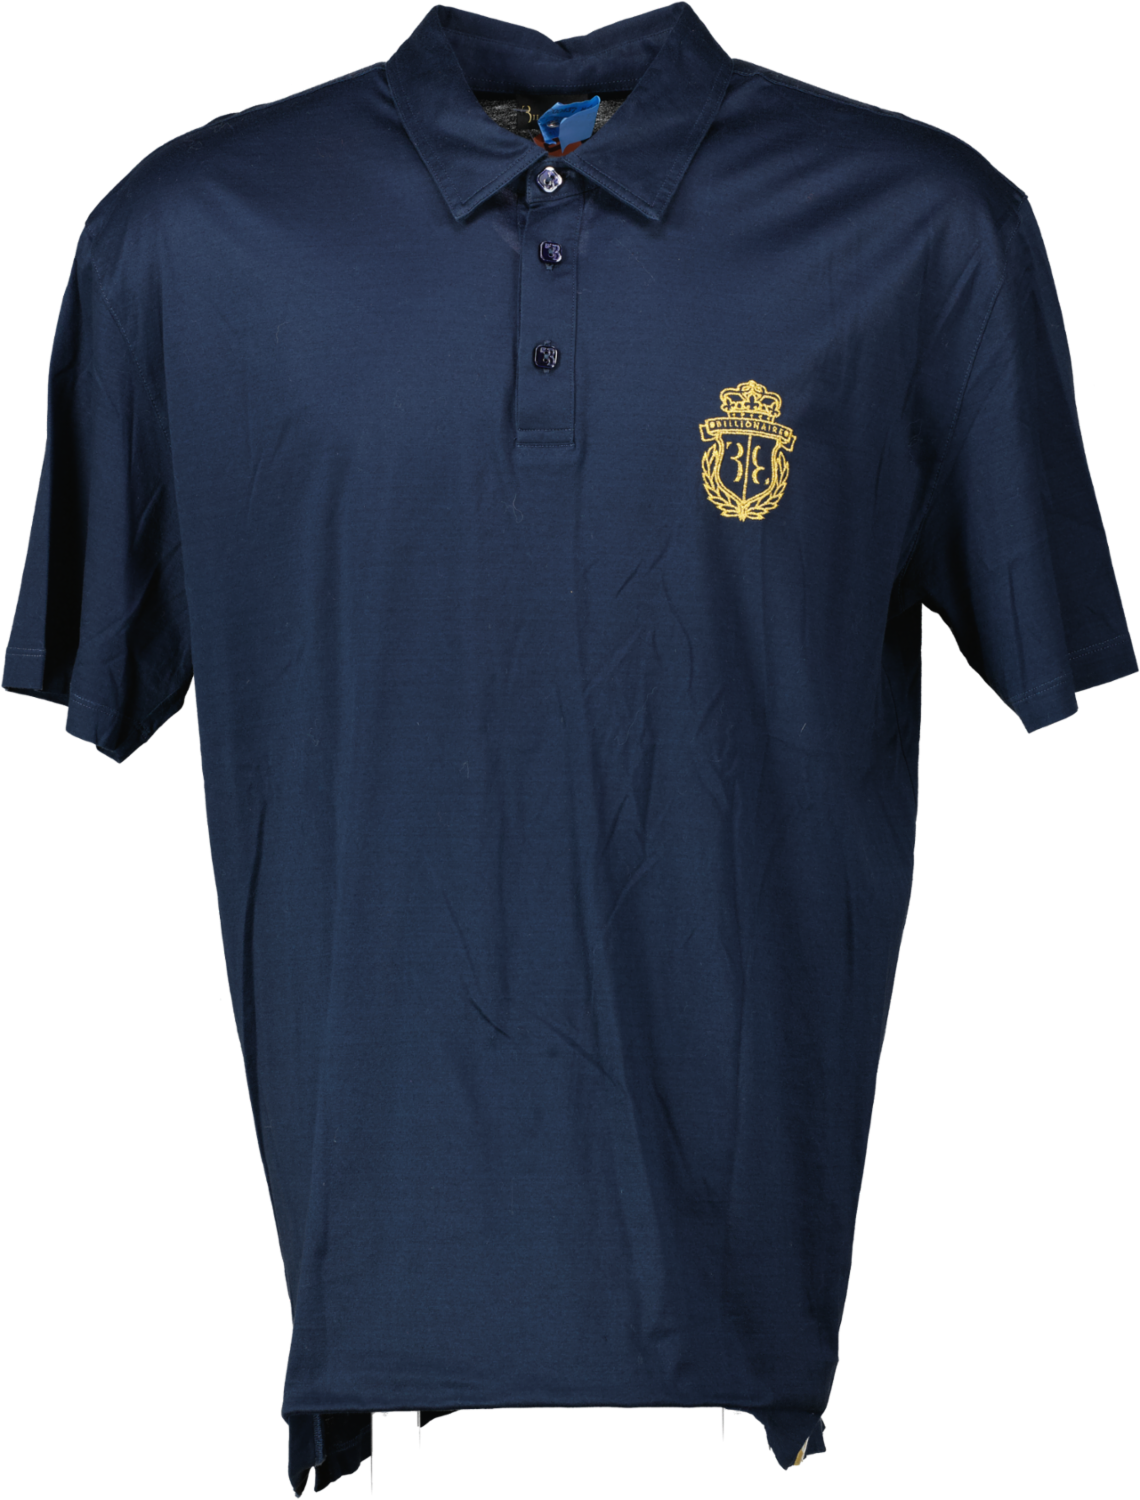 Billionaire Navy Blue Fine Jersey Polo Shirt With Gold Embroideredp Crest Logo UK 5XL